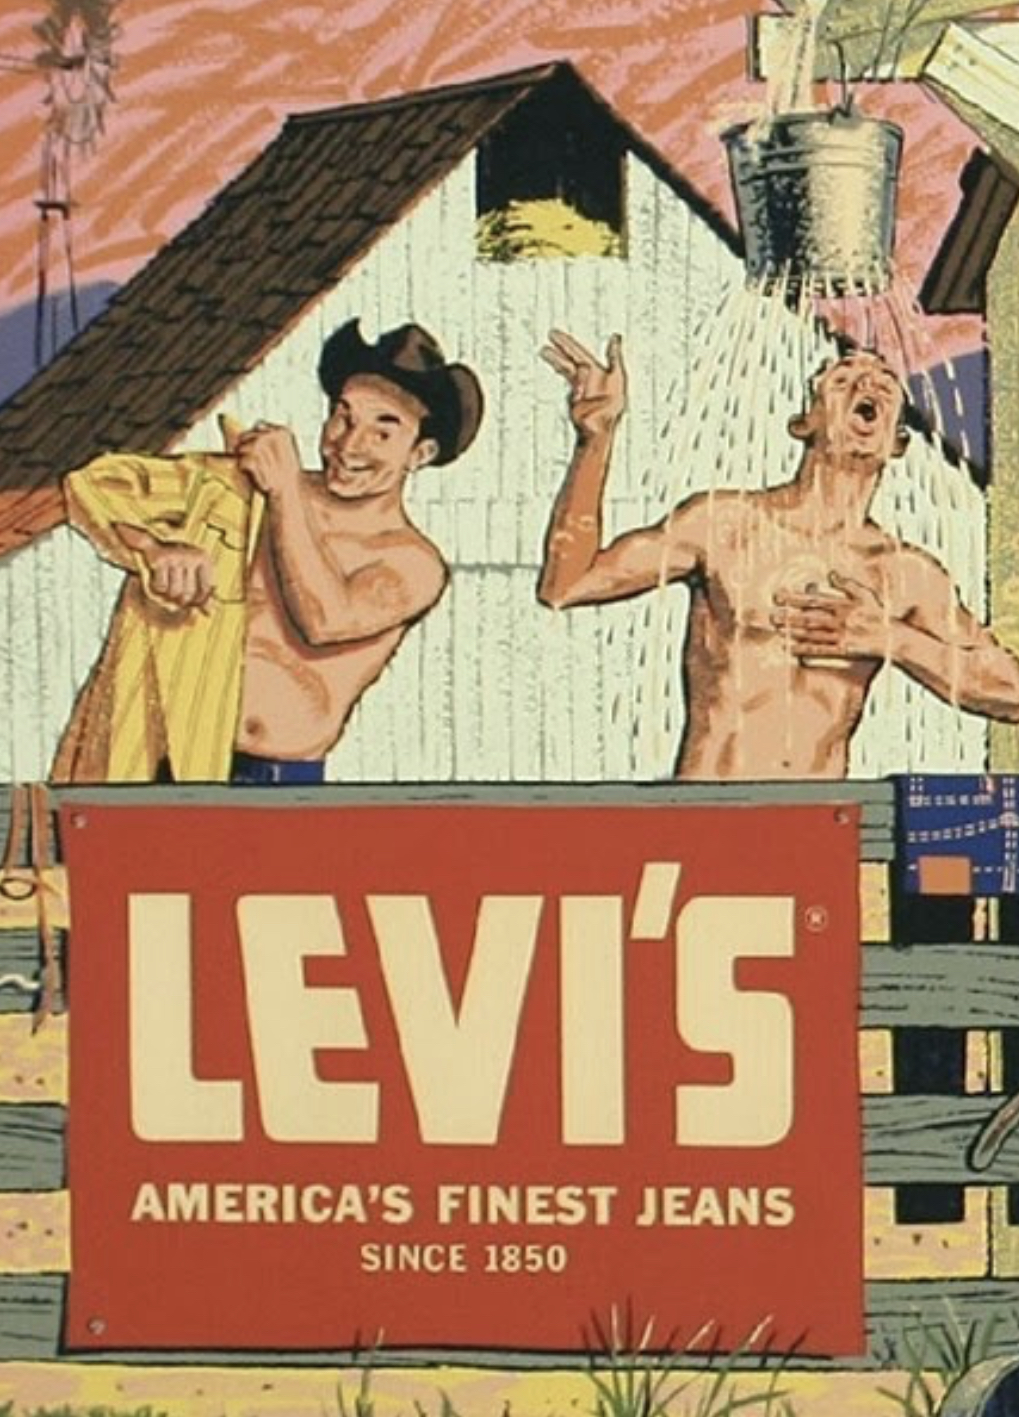 How Levi’s reflects the American Dream for many Germans and French